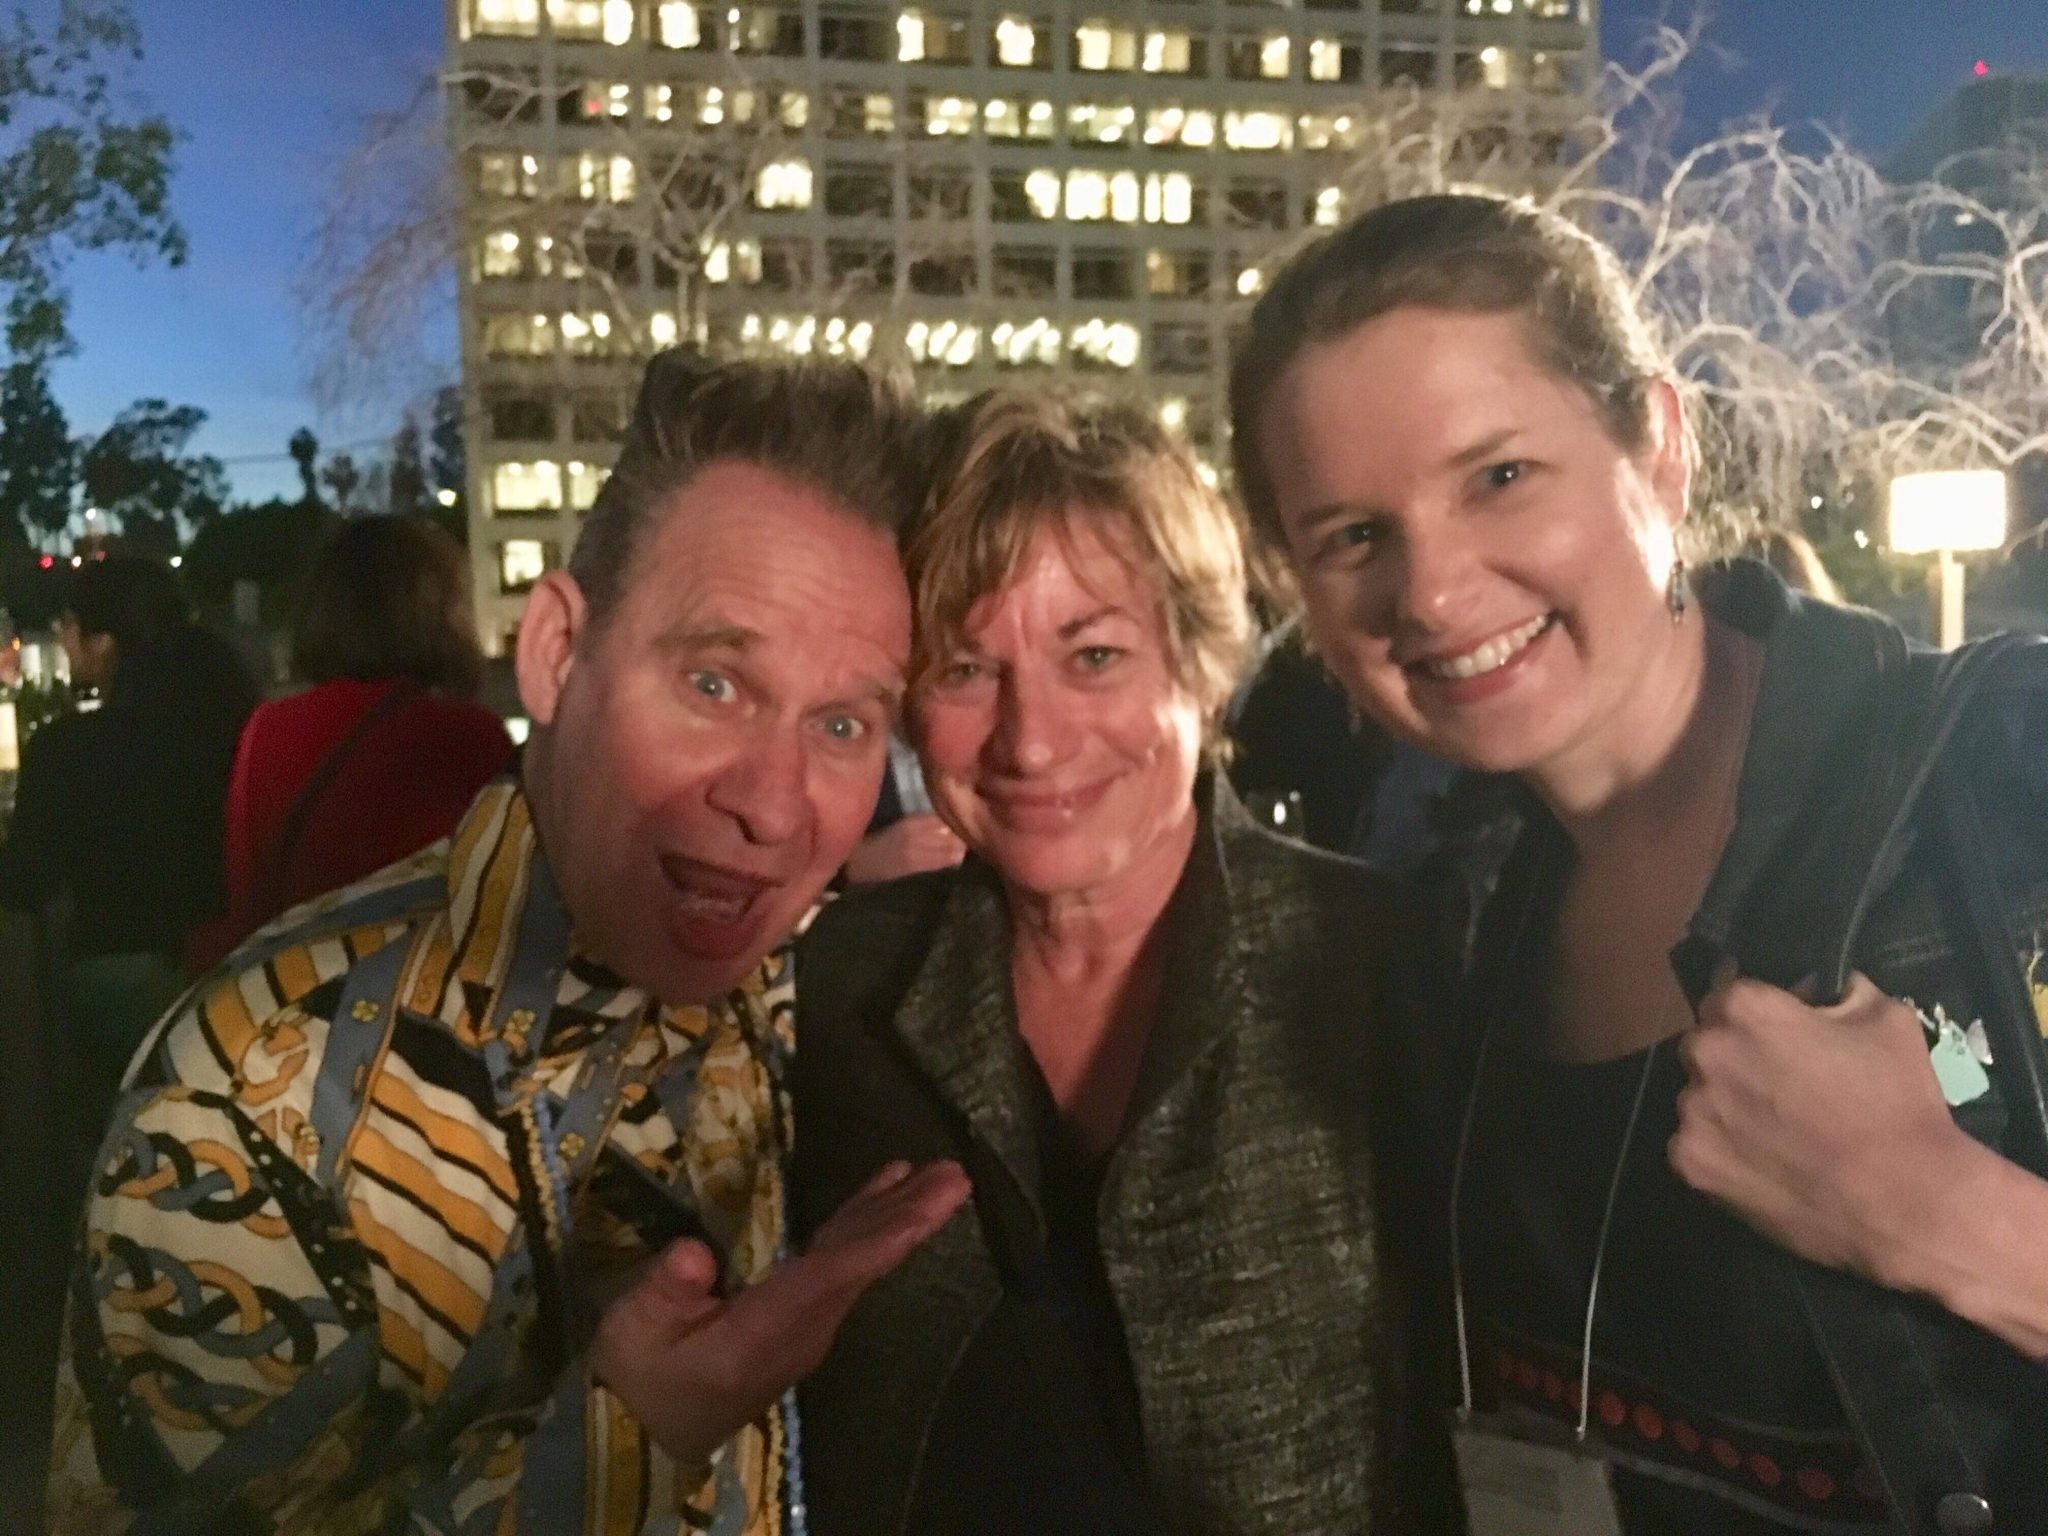 2048x1536 With Peter Sellars and Dr. Katie Steele Brokaw at the Shakespeare  Association of America.